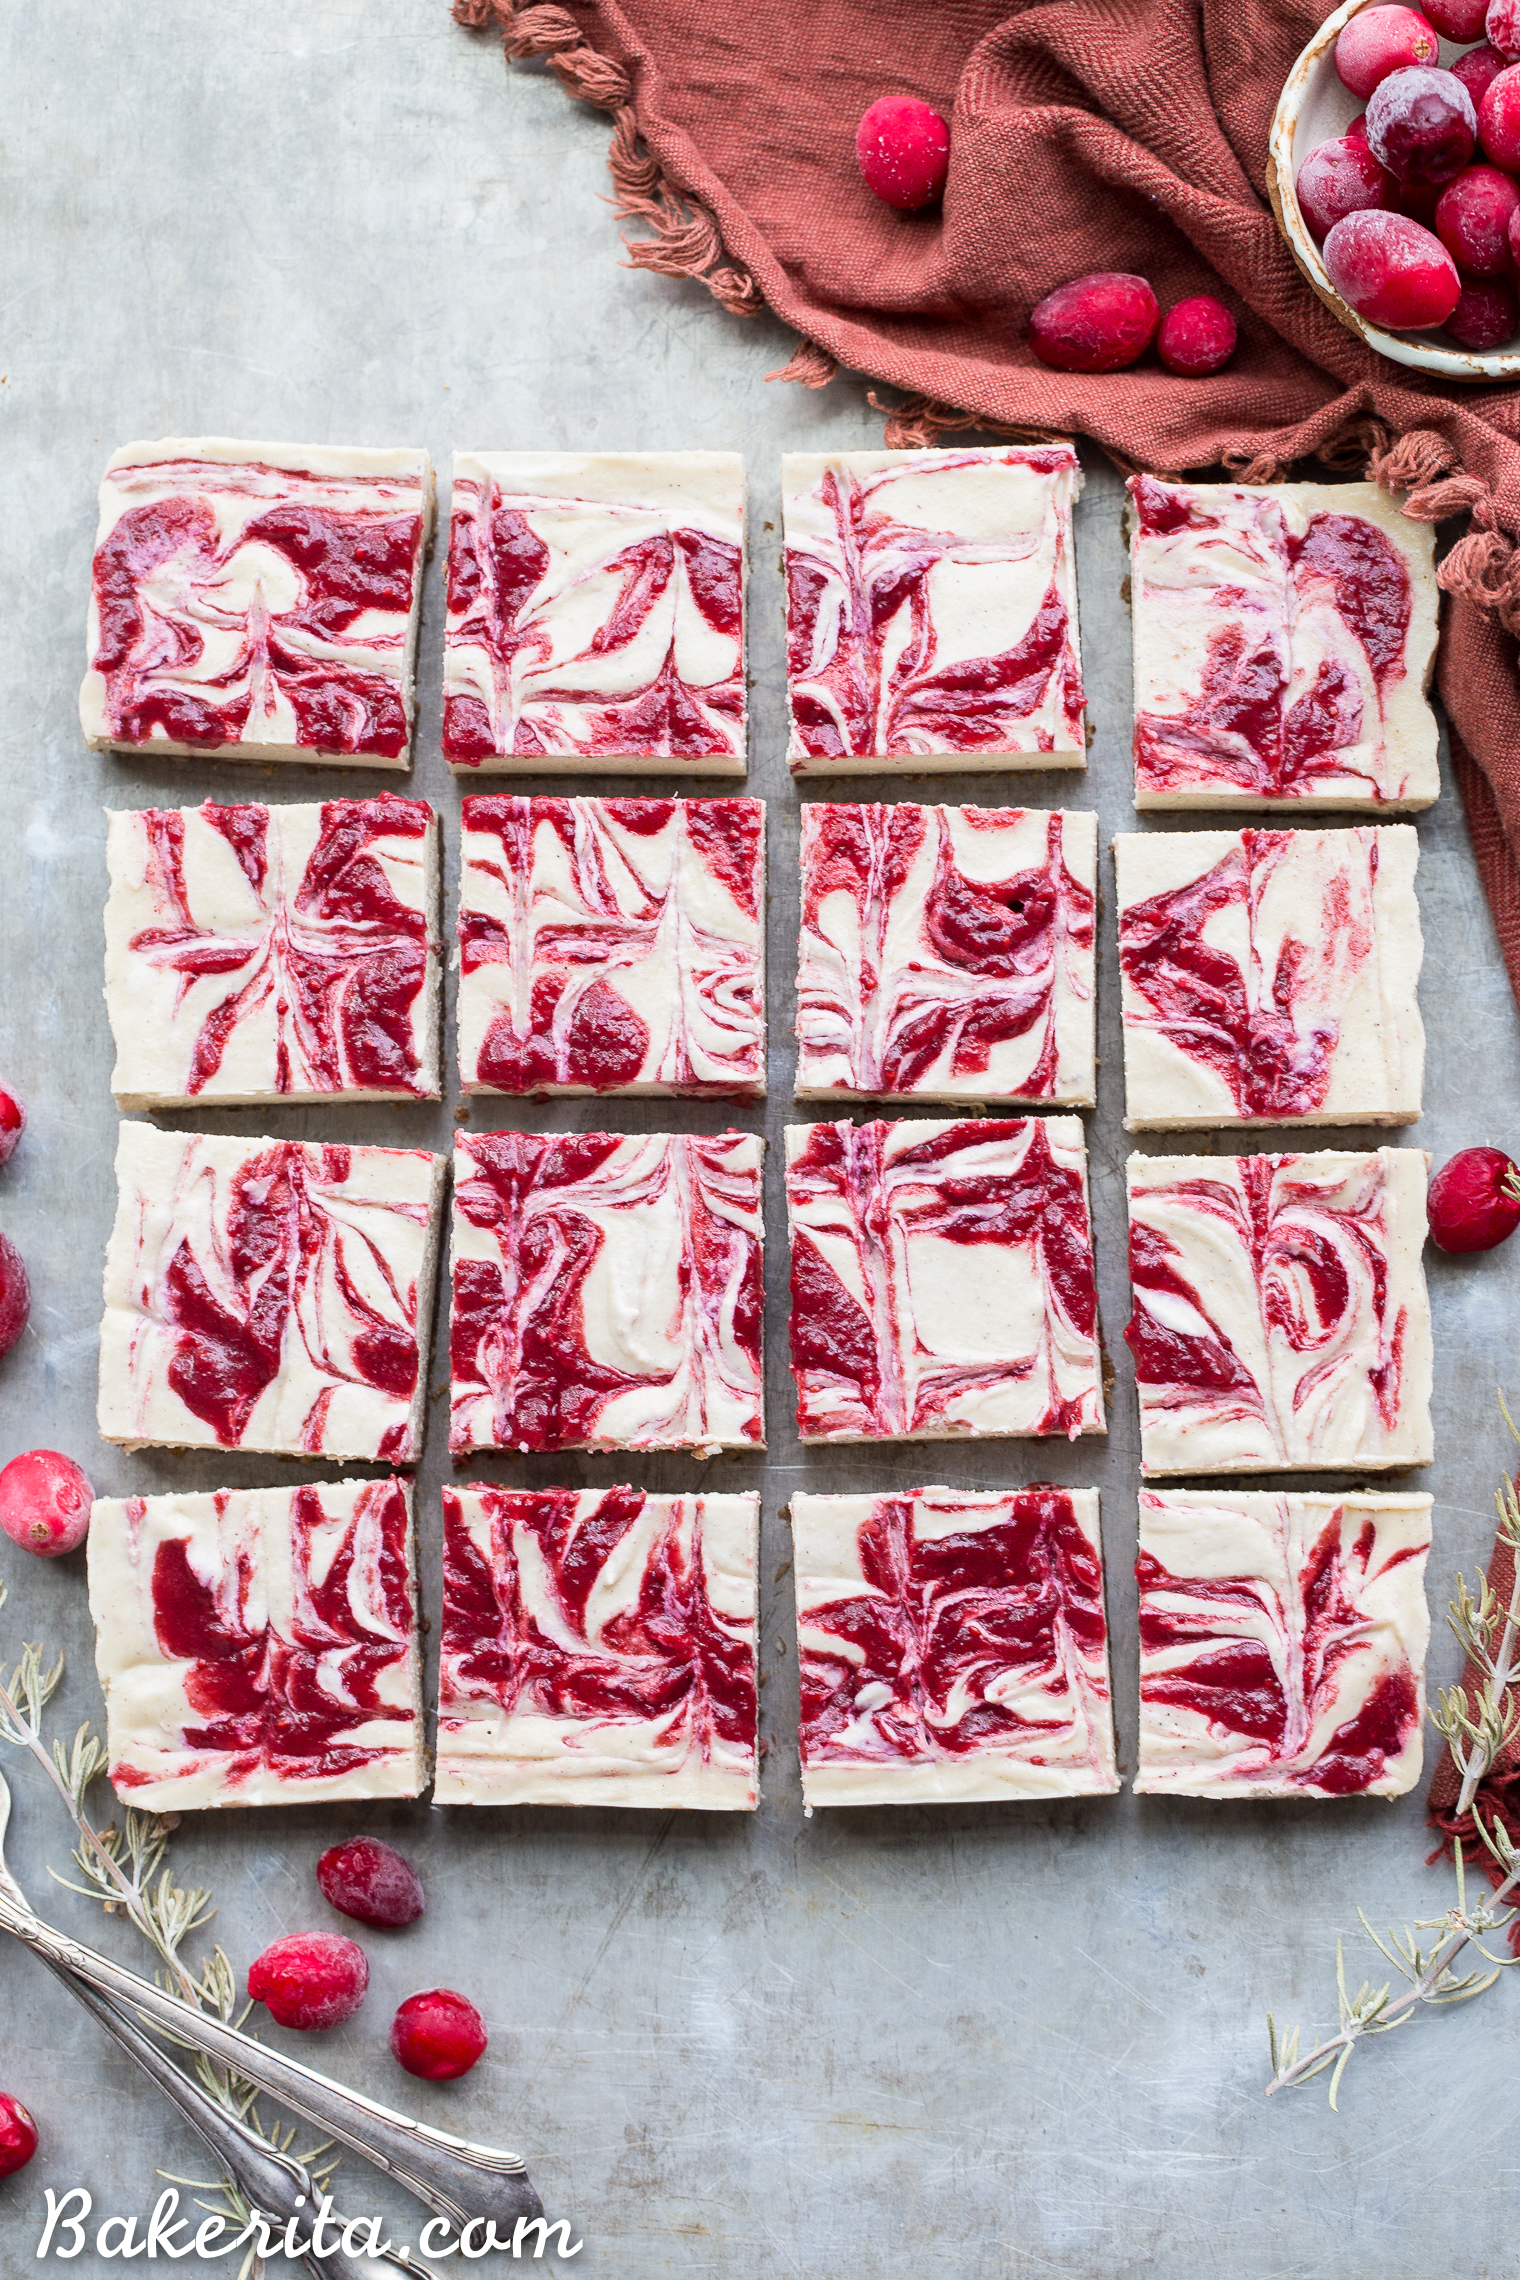 These No-Bake Vanilla Bean Cranberry Swirl Bars are made with cashews for a smooth and creamy "cheesecake" that's completely paleo, dairy free, vegan, and gluten free with no baking required! You can use leftover cranberry sauce for the tart cranberry swirl.